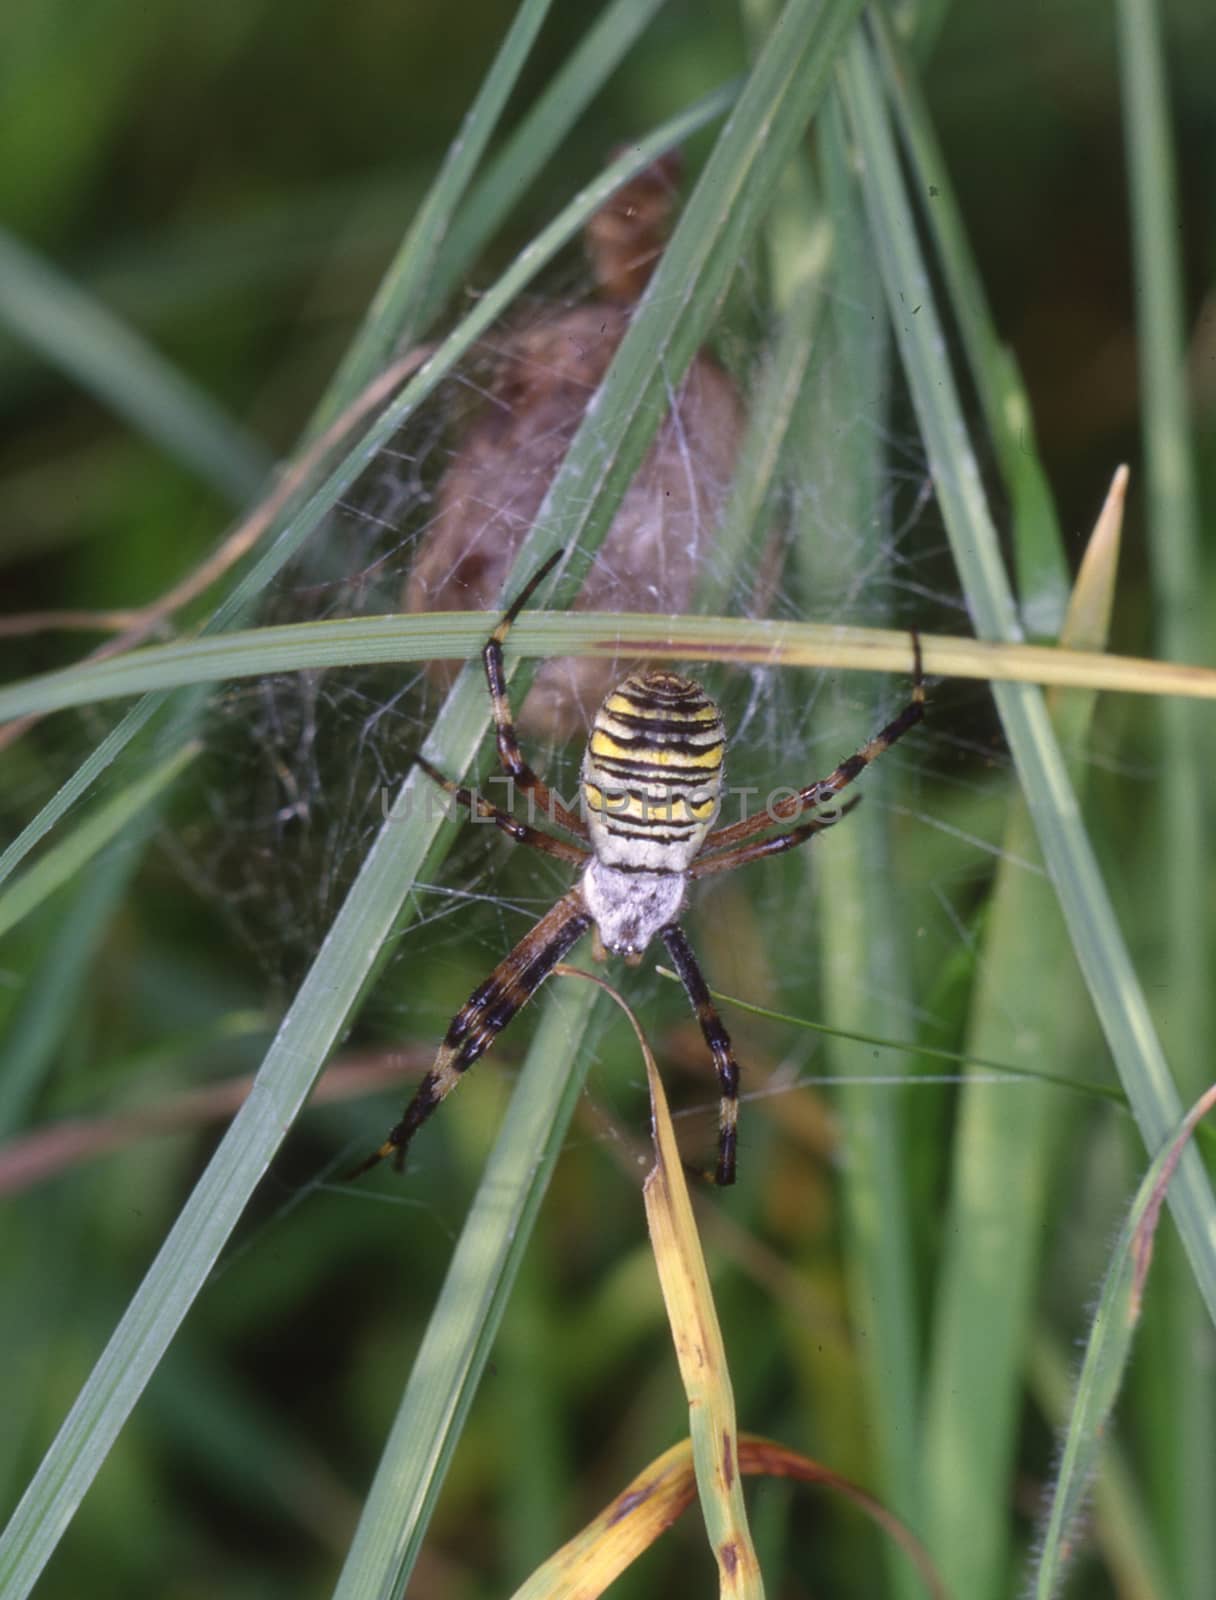 Wasp spider in the web between blades of grass by Dr-Lange